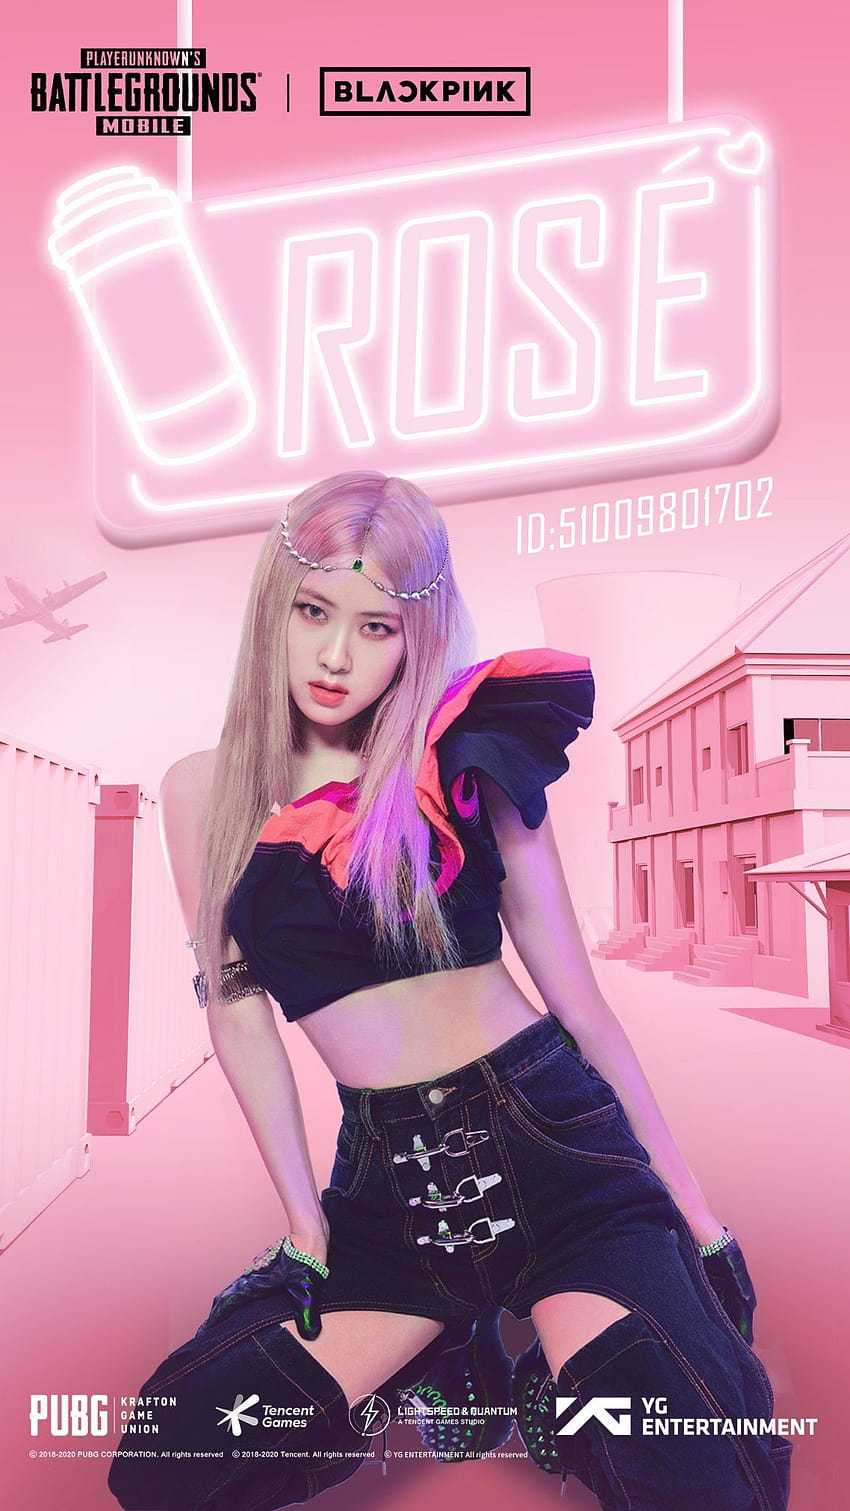 BLACKPINK And PUBG Mobile Reveal Details For Their New Collaboration, blackpink pubg HD phone wallpaper